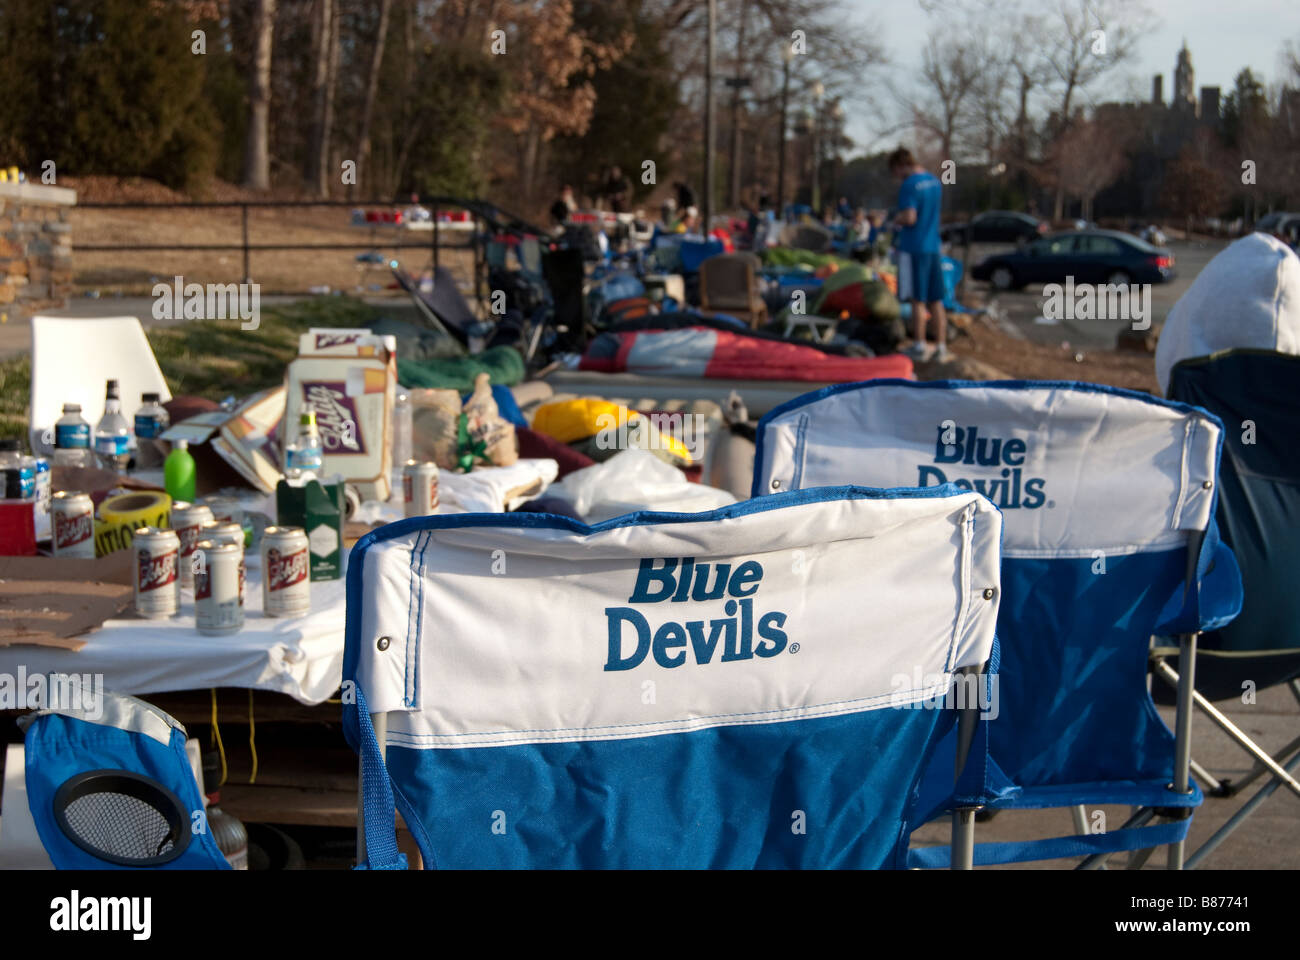 Students of Duke University camp out in front of Cameron Indoor Stadium before a Duke vs UNC Basketball game Stock Photo